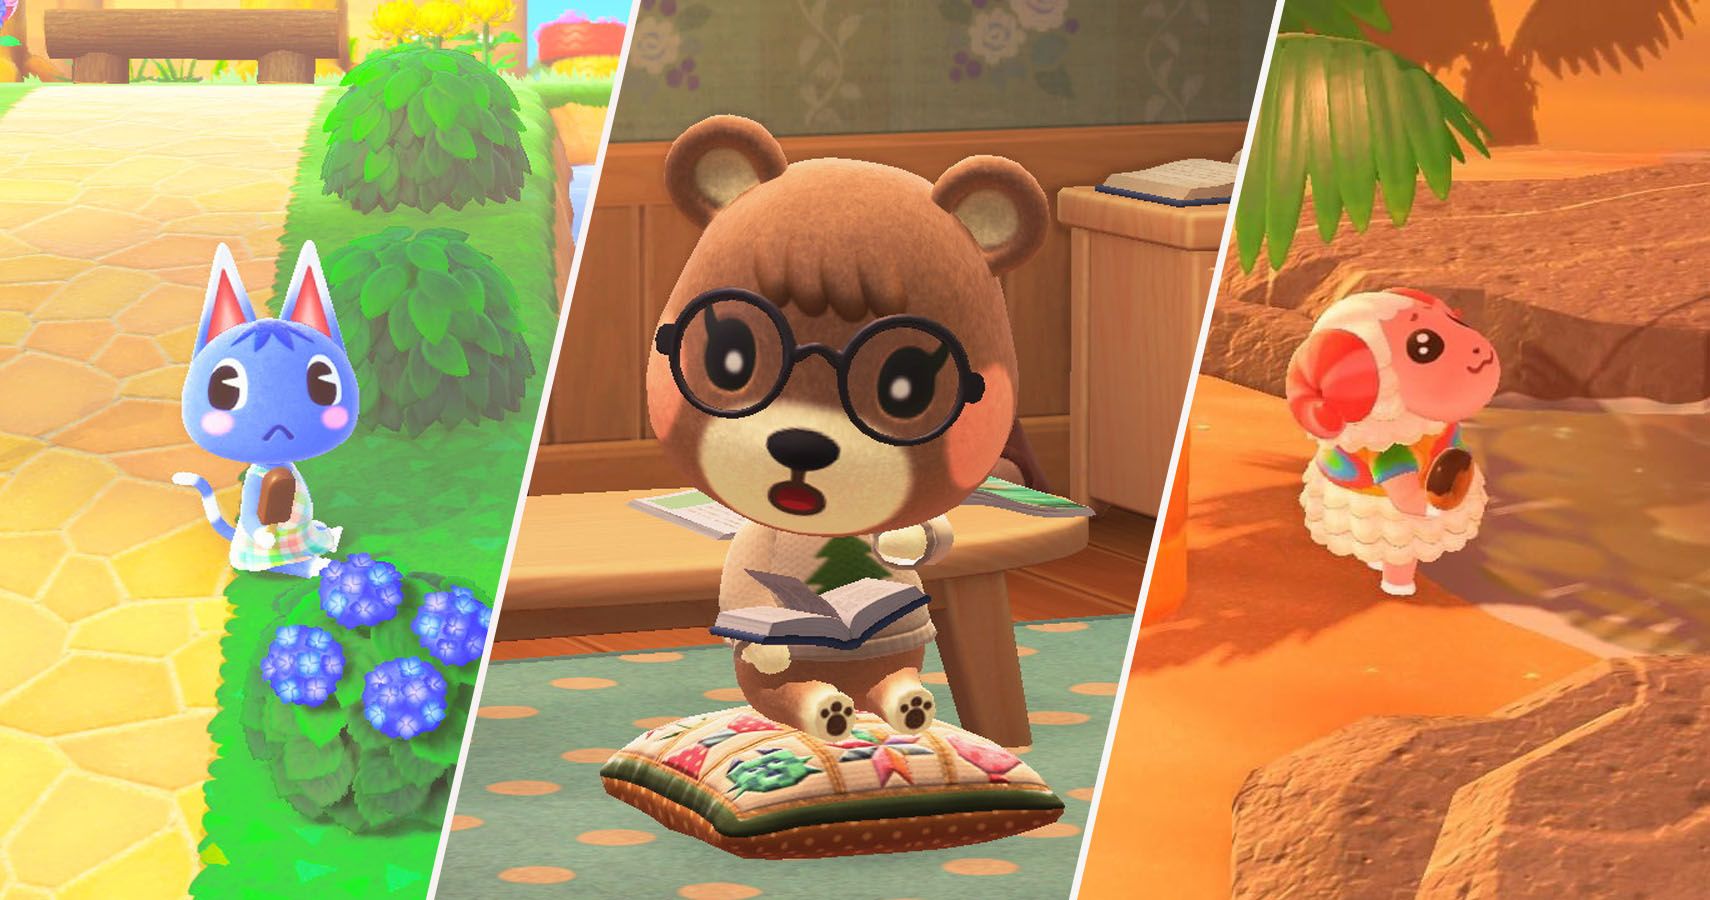 The 15 Cutest Villagers From Animal Crossing, Ranked | Game Rant - End